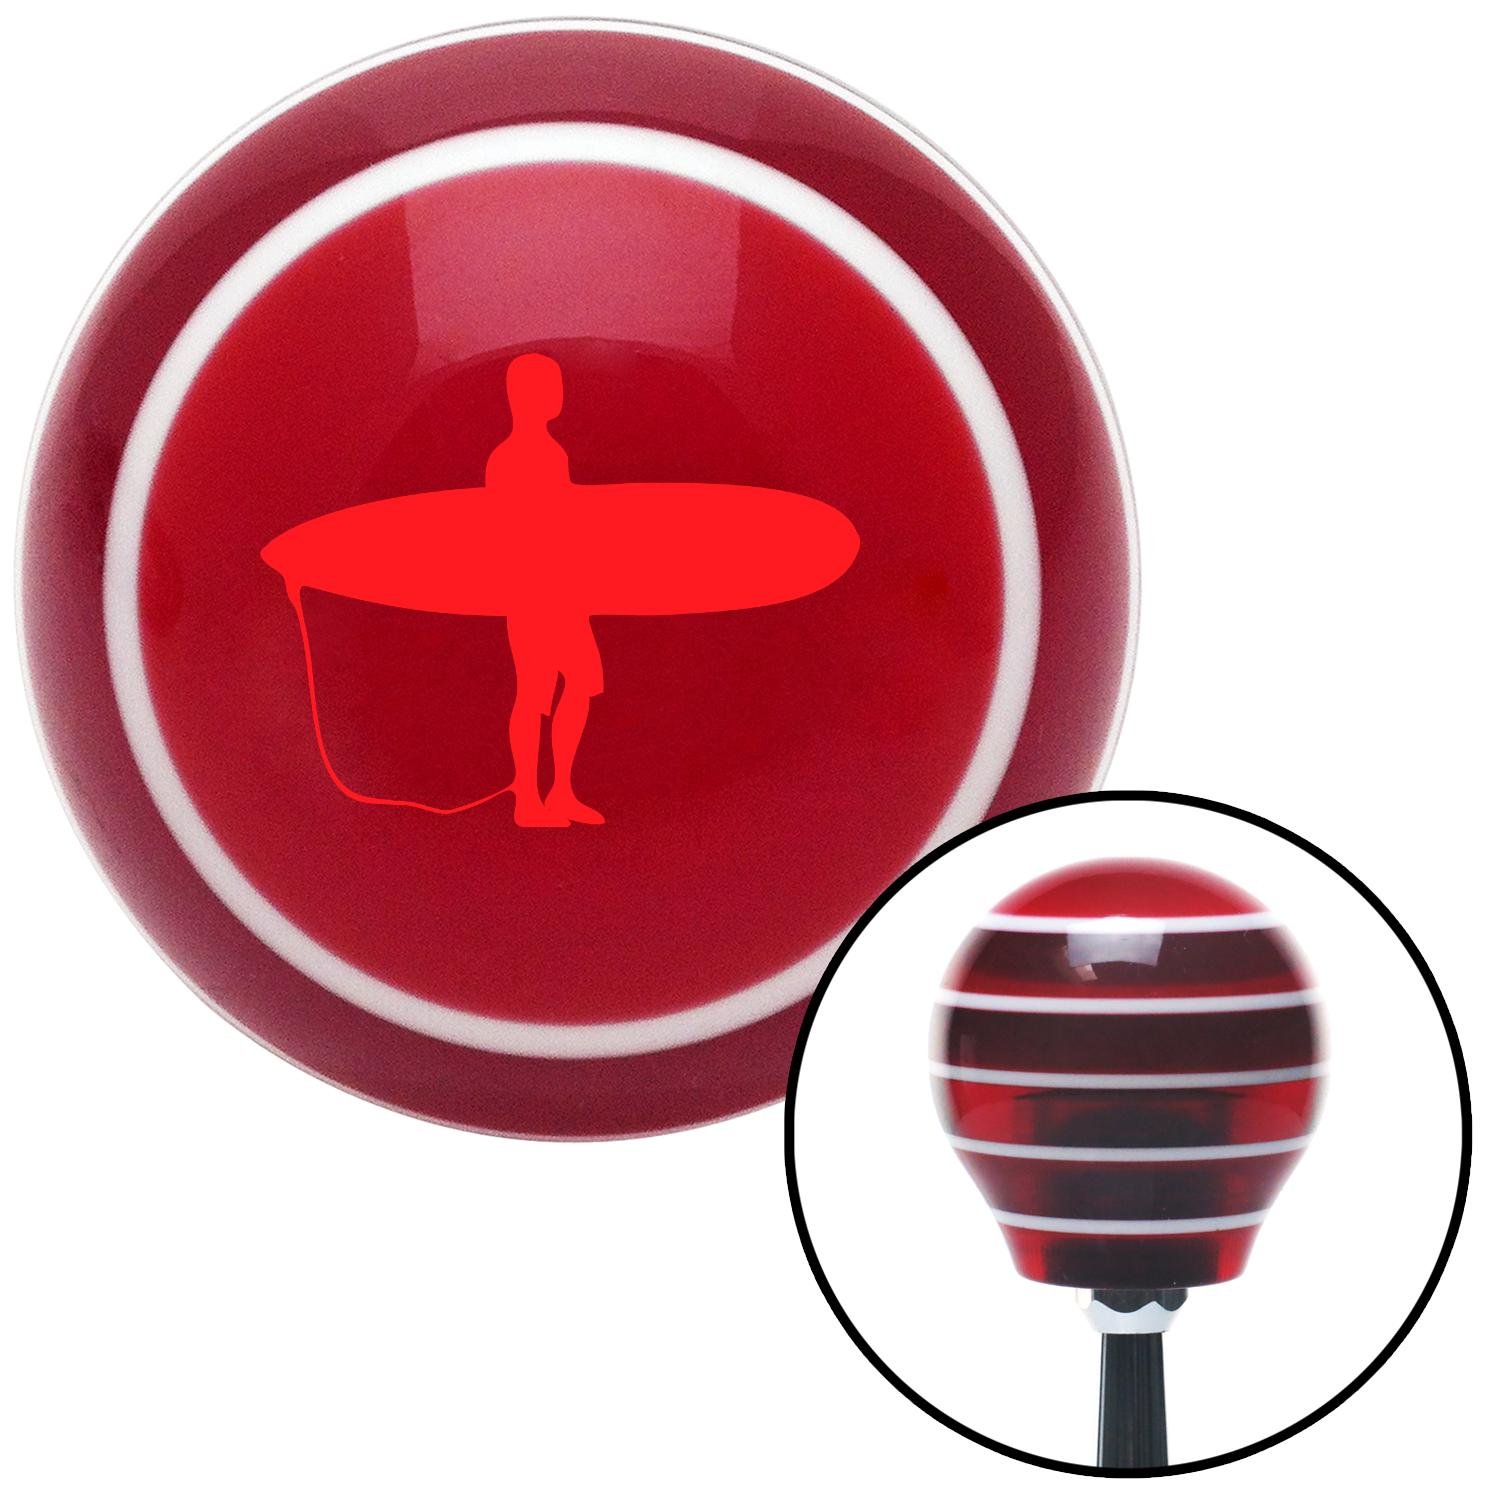 Red Surfer Waiting on Beach Red Stripe Shift Knob with M16 x 1.5 Insert ...